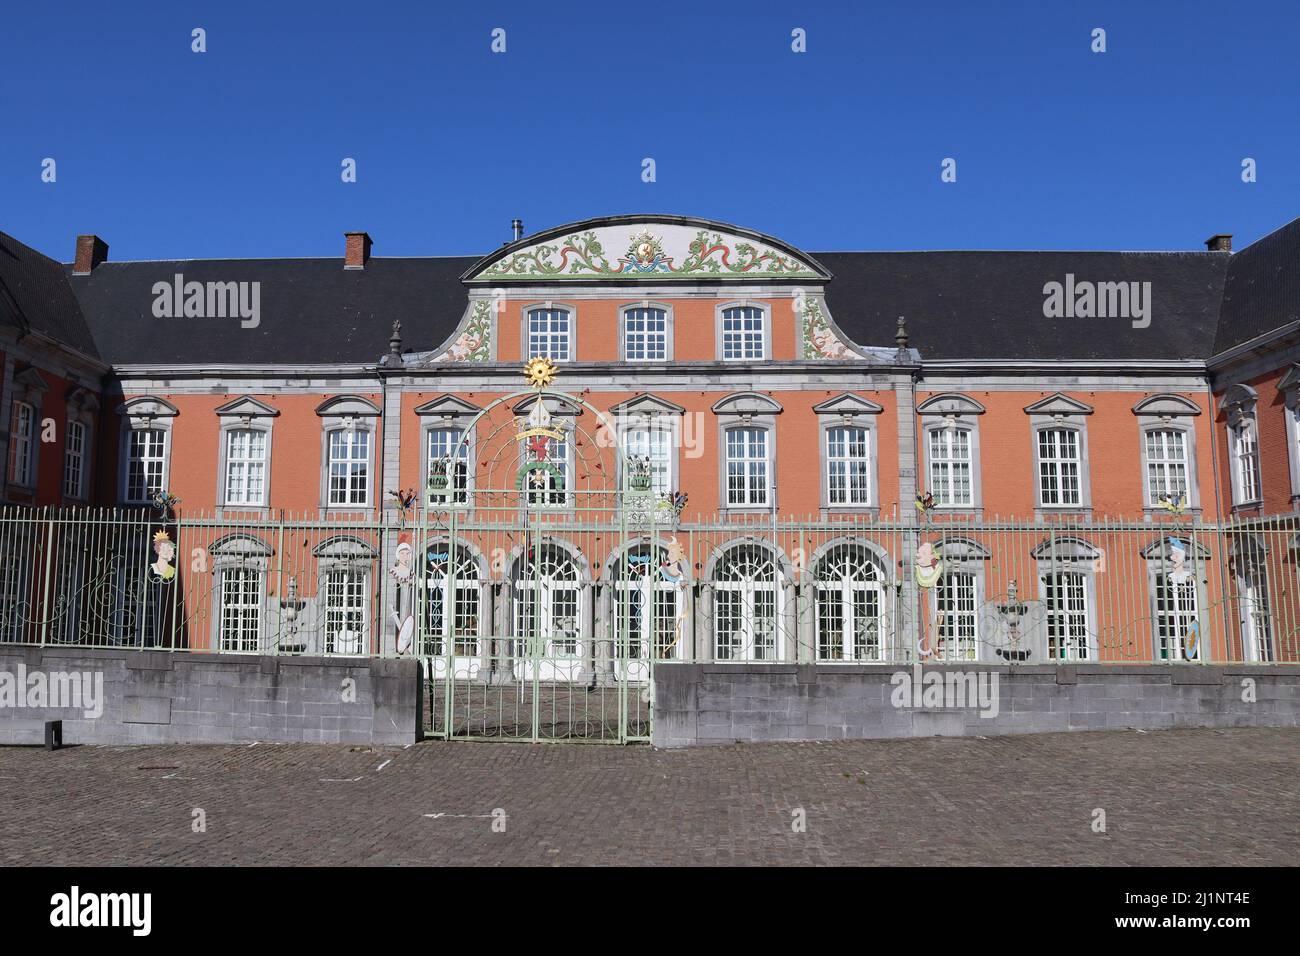 The 18th century buildings of the Abbey Palace (Quartier Abbaital), in Sainte Hubert, Ardennes, Belgium. Now a public building owned by the state. Stock Photo